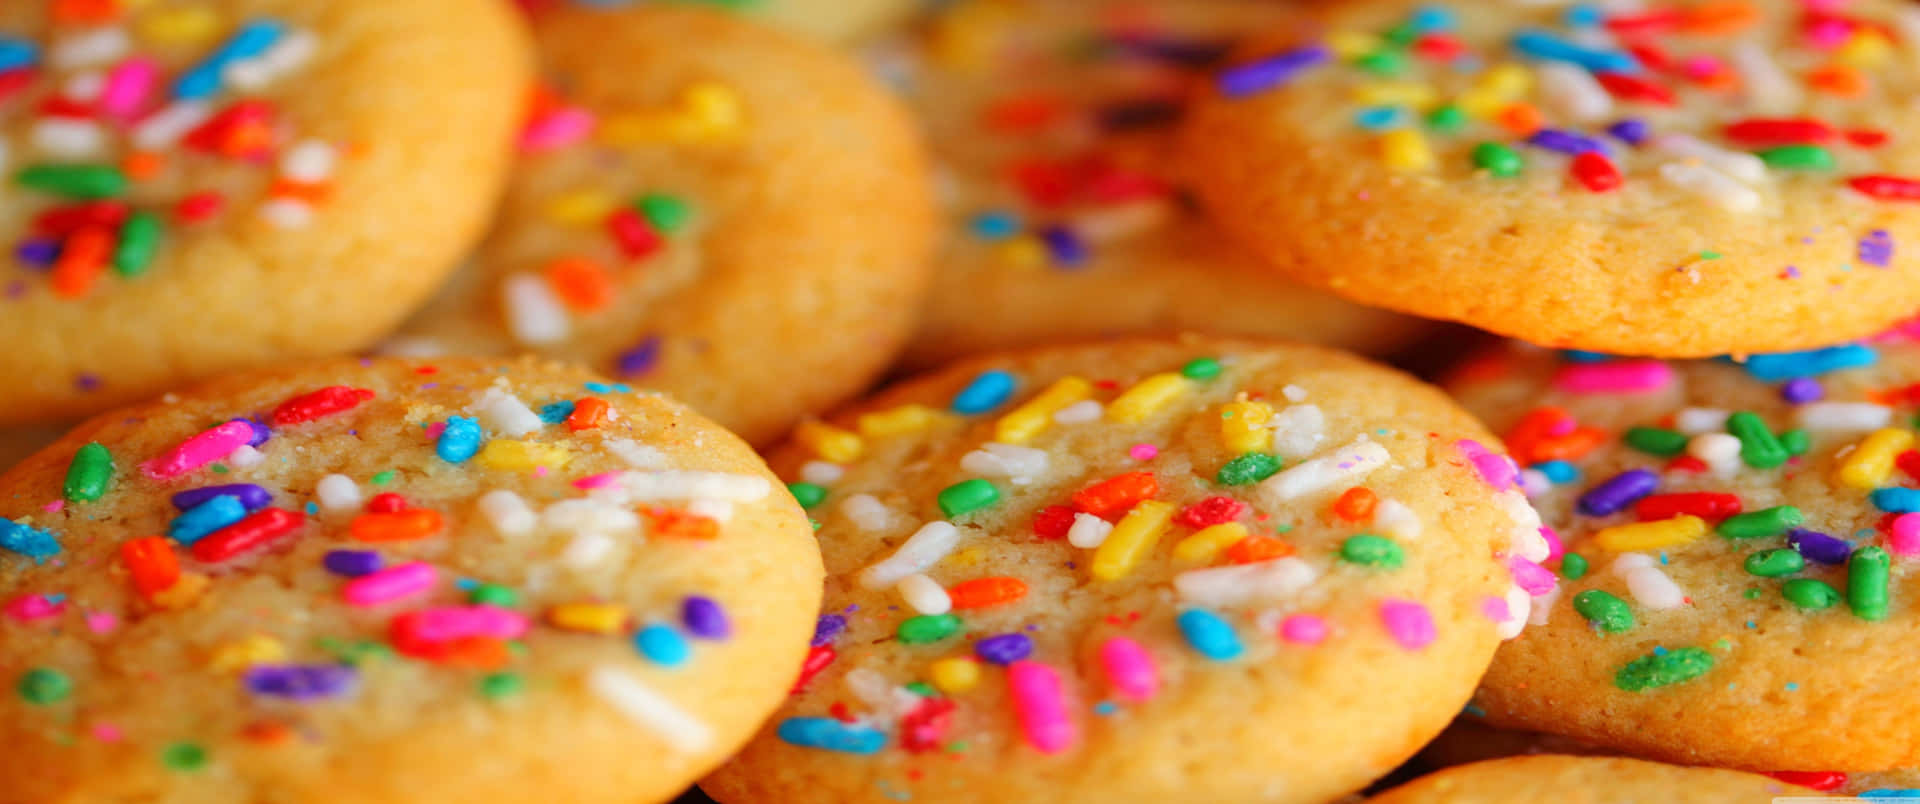 Close-up Photograph Sweet 3440x1440p Cookies Background